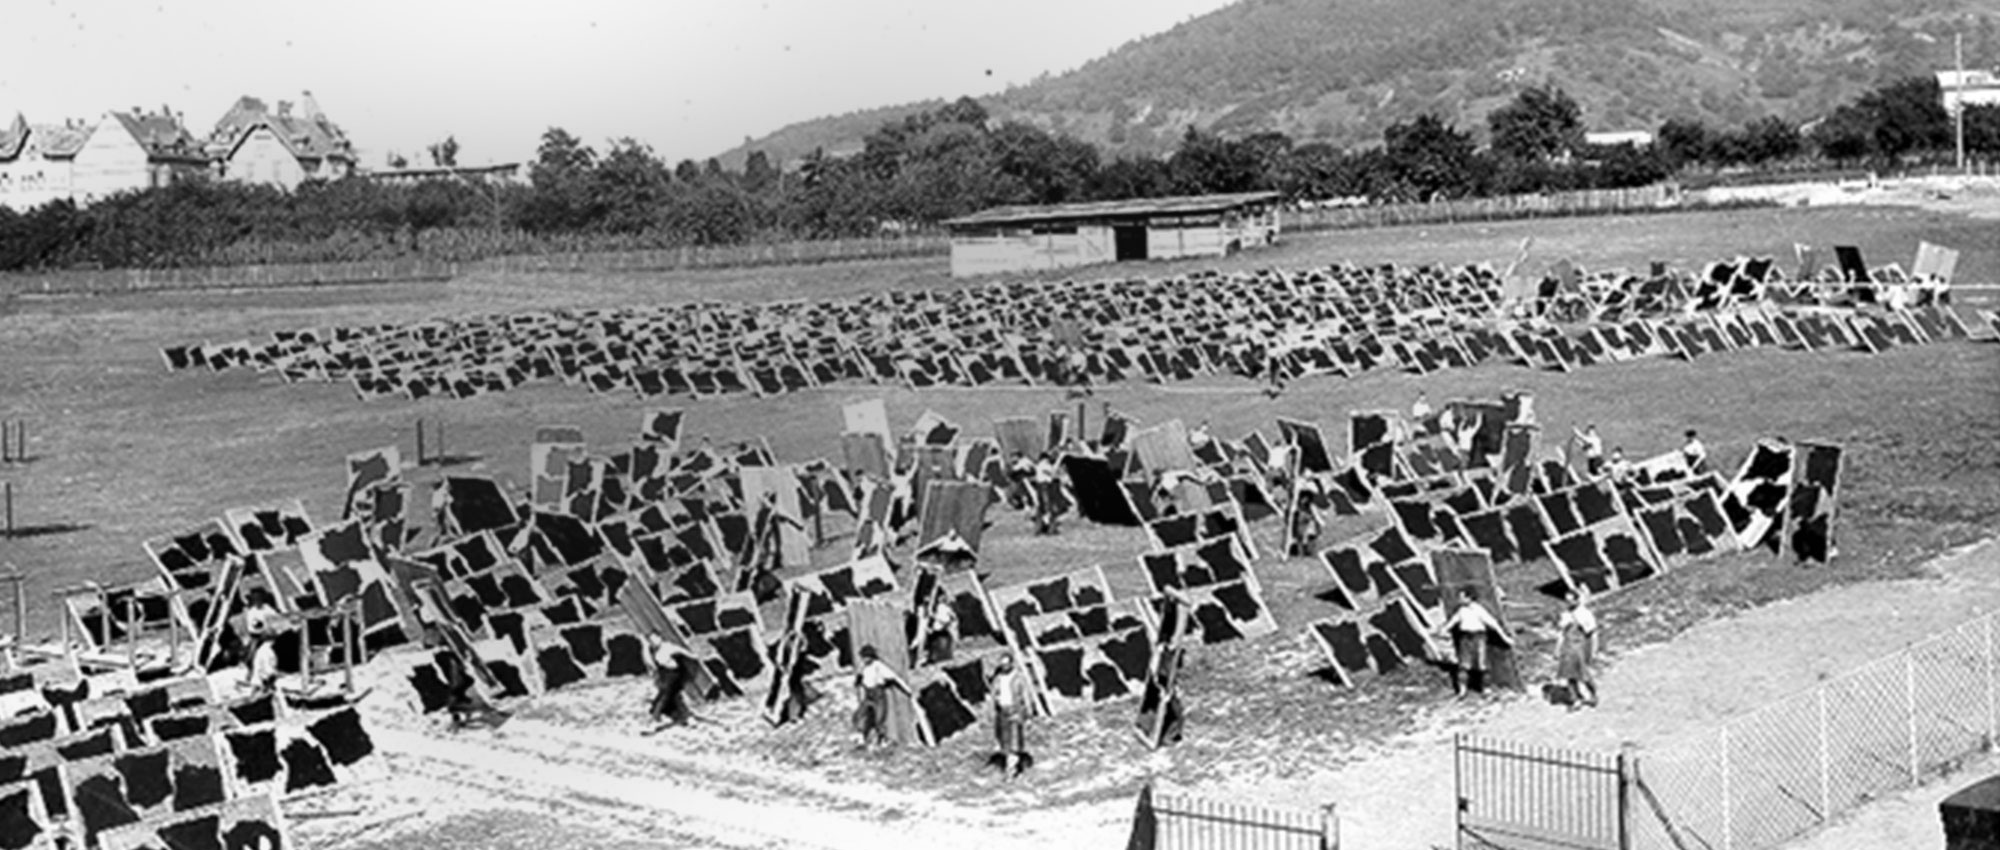 Historical picture of men and women stretching fabrics on wooden boards in a meadow